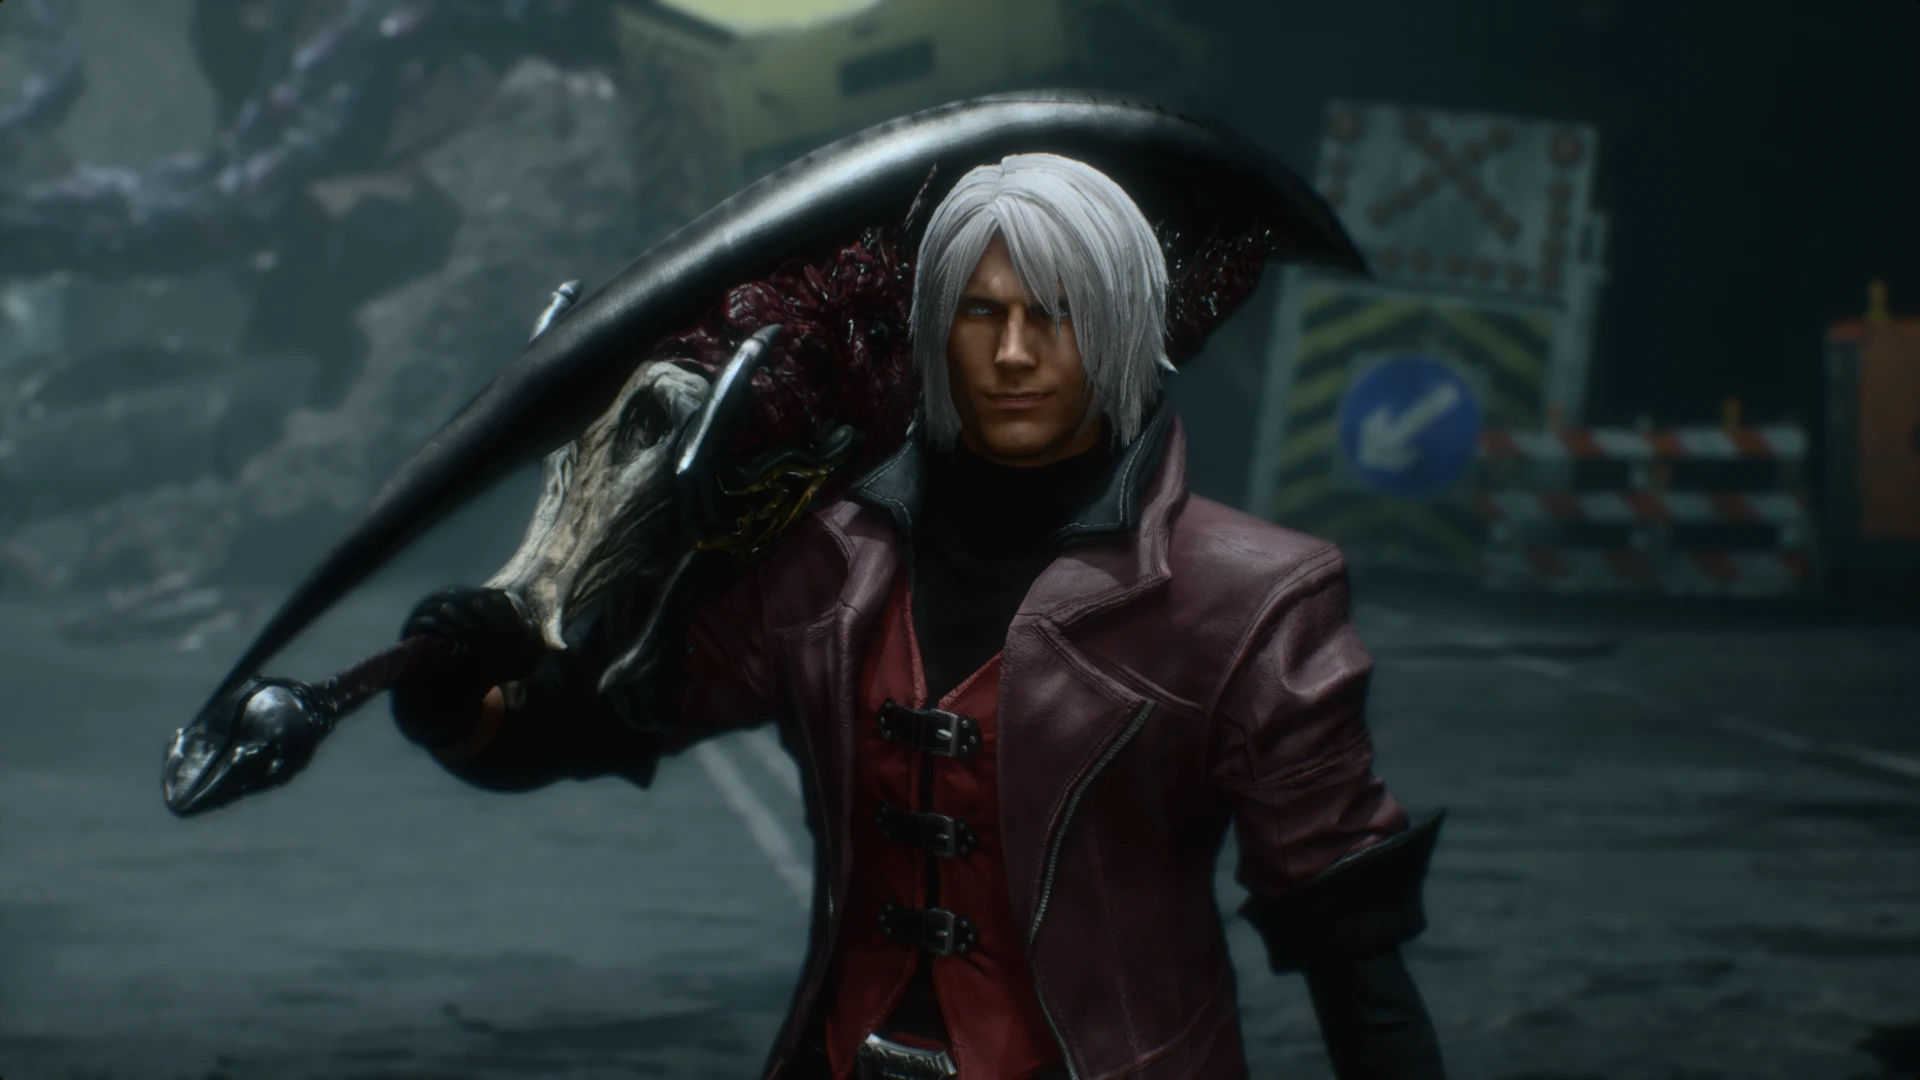 Devil May Cry: Dante Devil May Cry 1 Premium Statue by Darkside